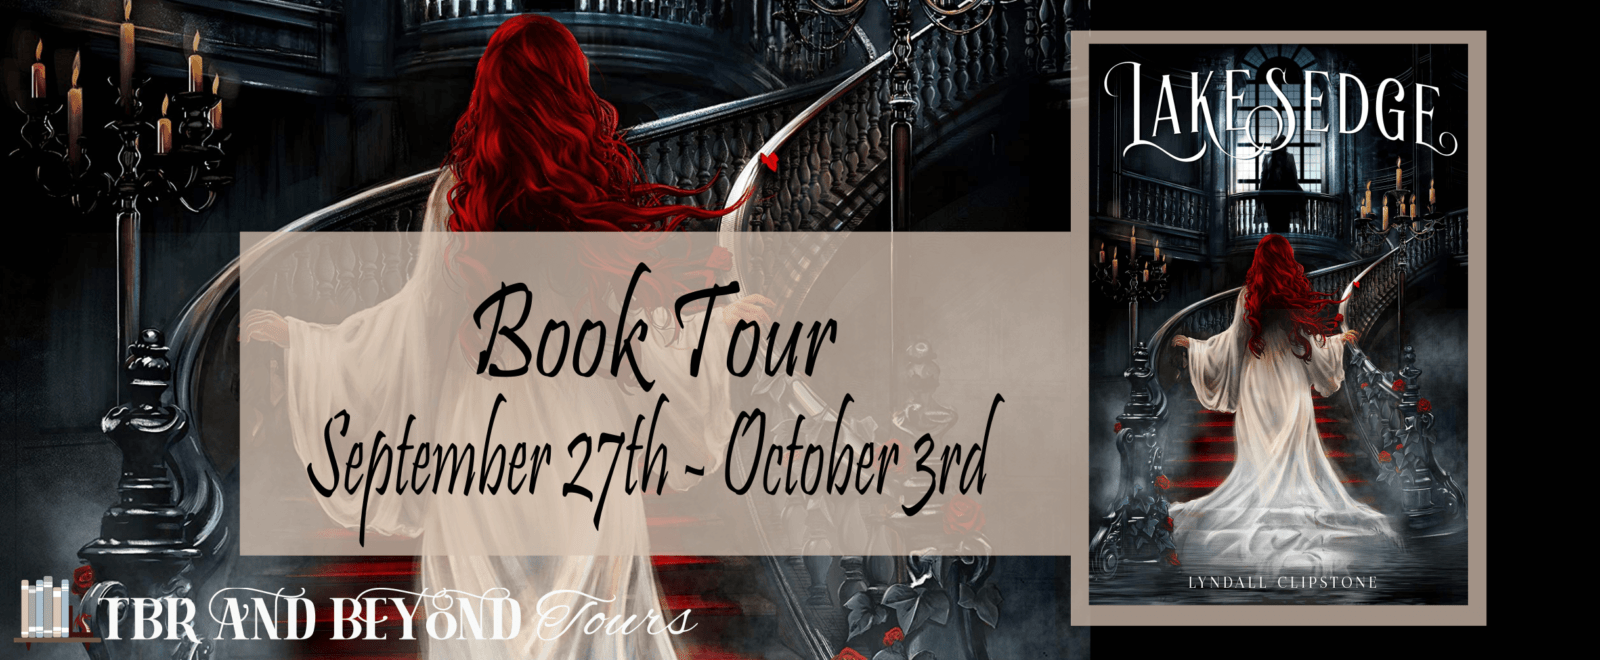 Lakesedge by Lyndall Clipstone TBR & Beyond Blog Tour ● Review